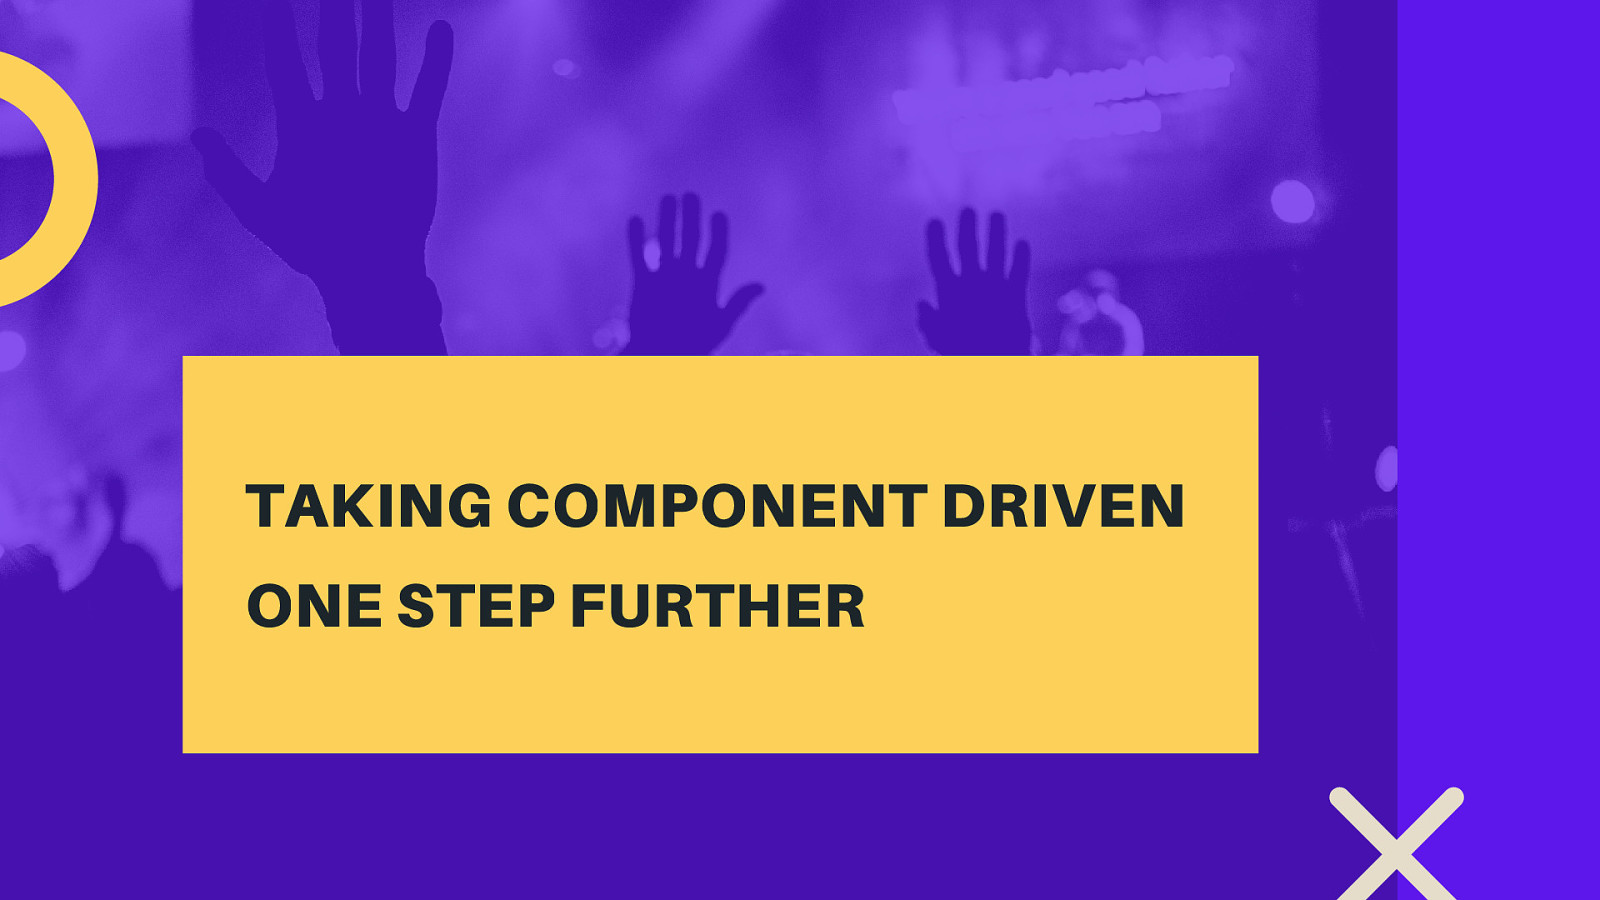 Taking Component Driven One Step Further